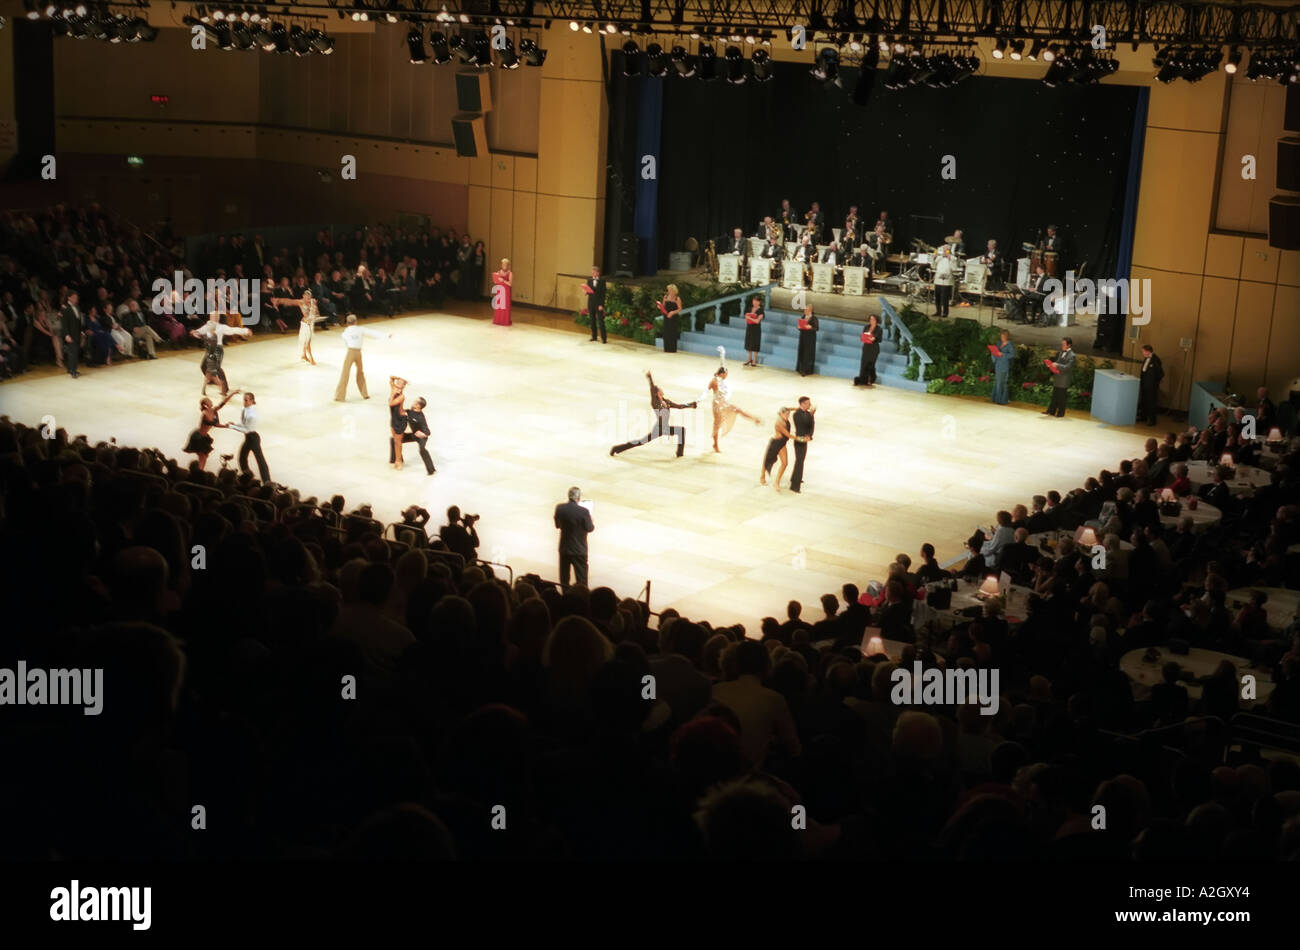 The UK Open Ballroom Championships 2003 in the Bournemouth